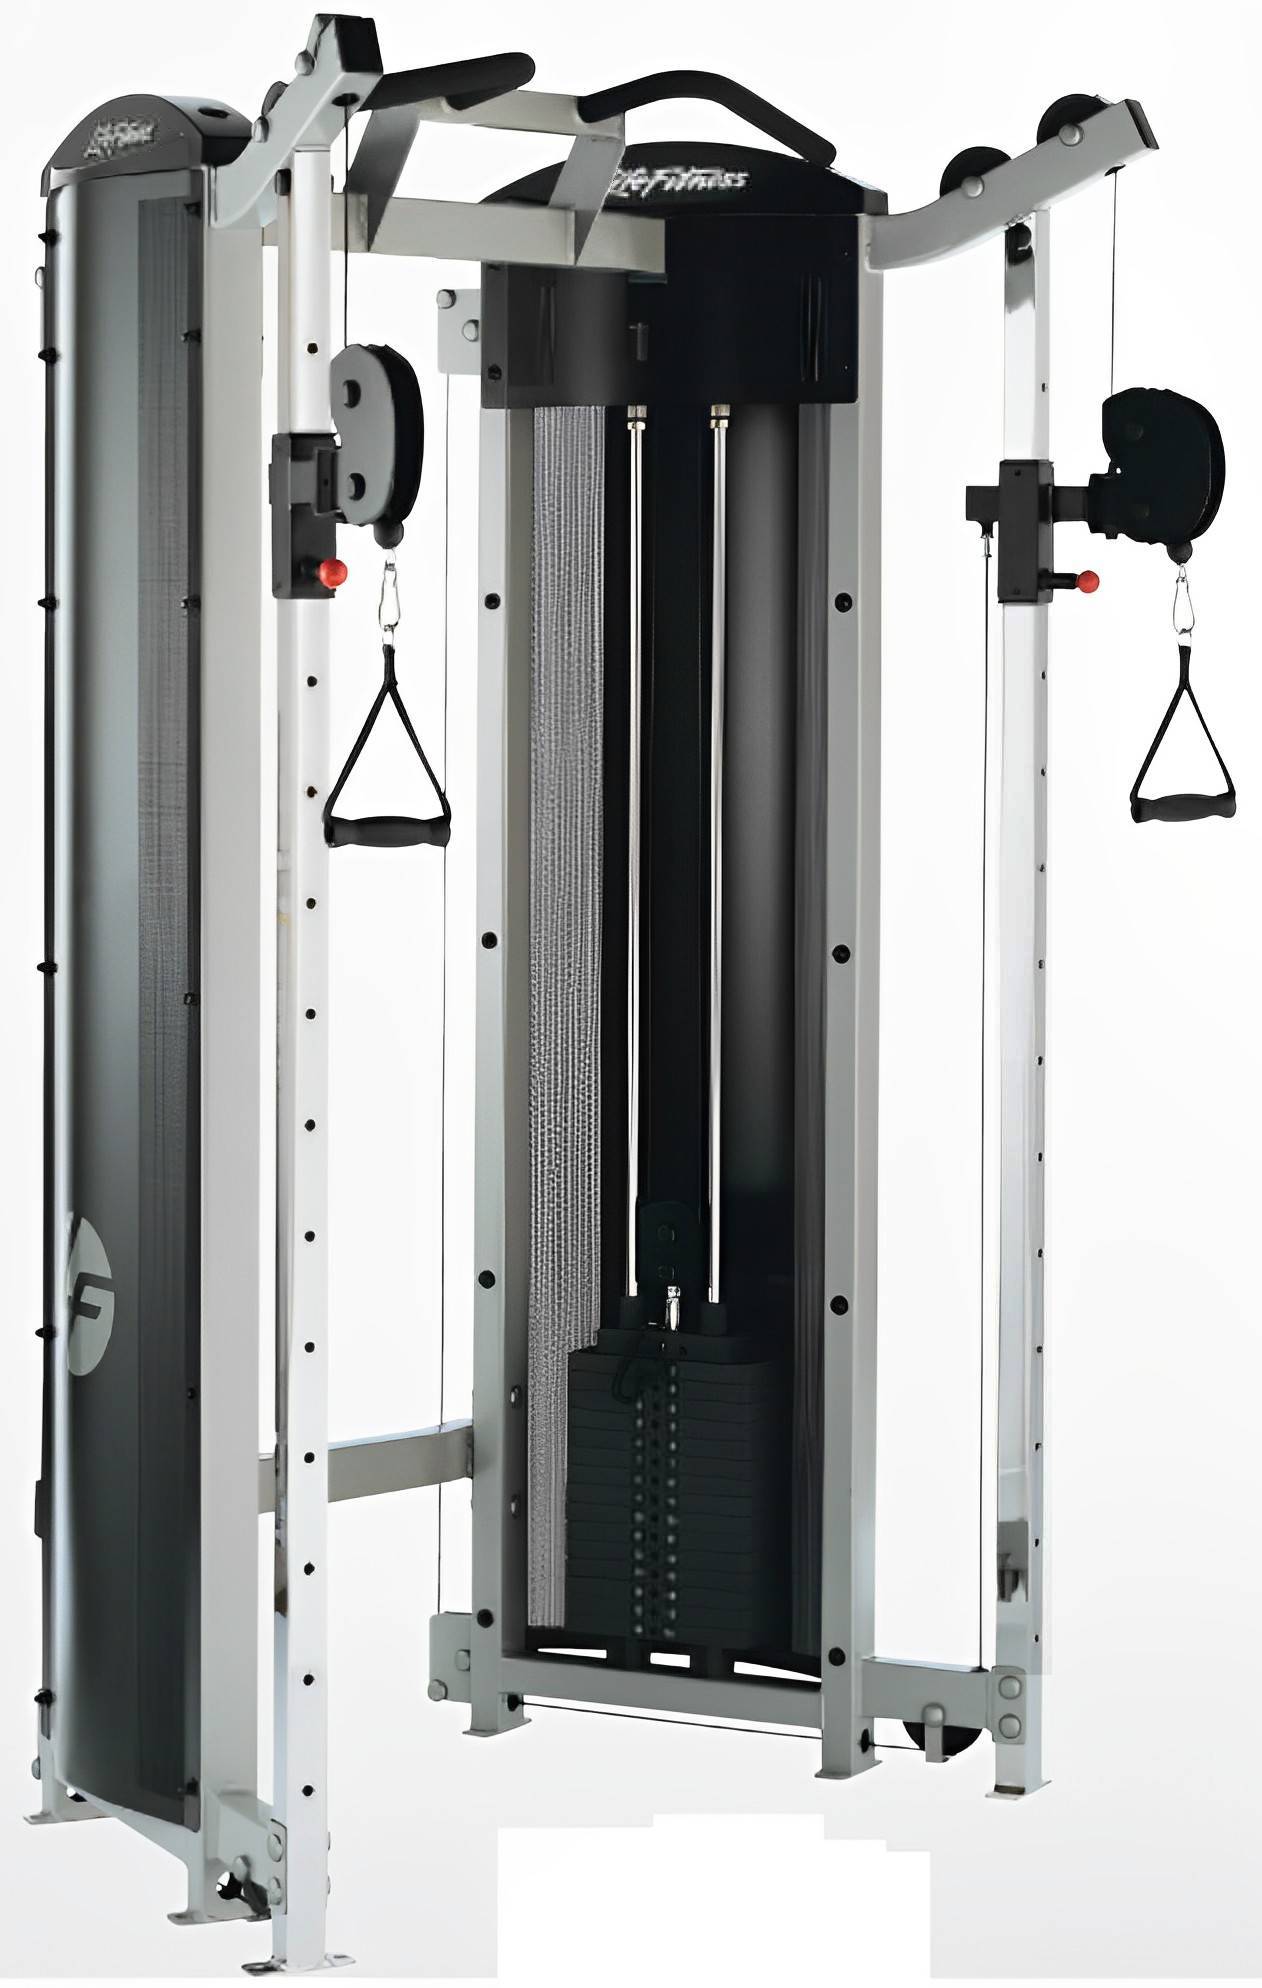 Life Fitness Fit Series Dual Adjustable Pulley